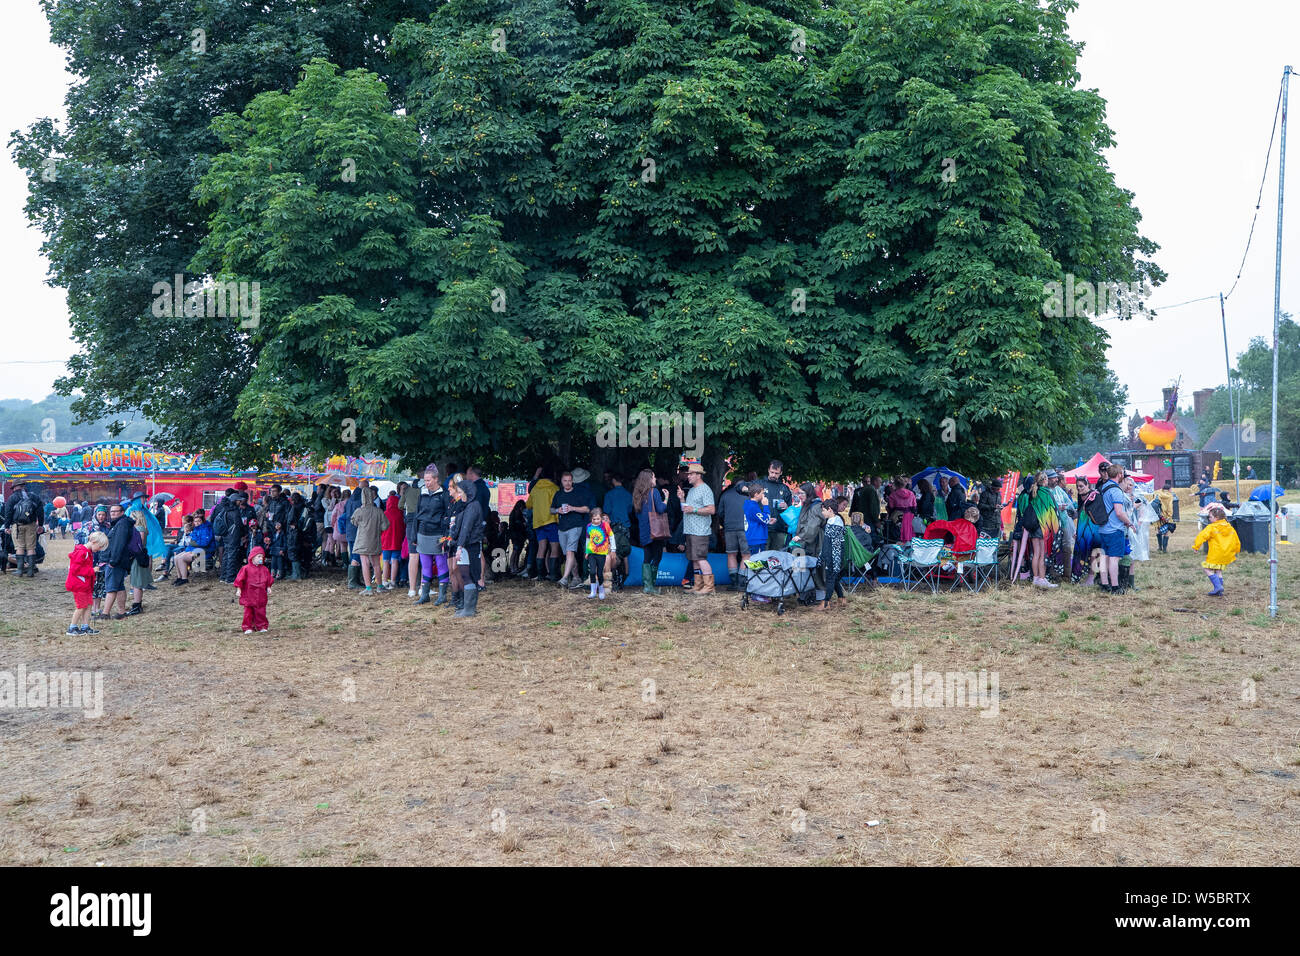 Standon, UK. Saturday 27 July 2019.  festival attendees take shelter from the rain at Standon Calling set in the picturesque grounds of Standon Lordship © Jason Richardson / Alamy Live News Stock Photo